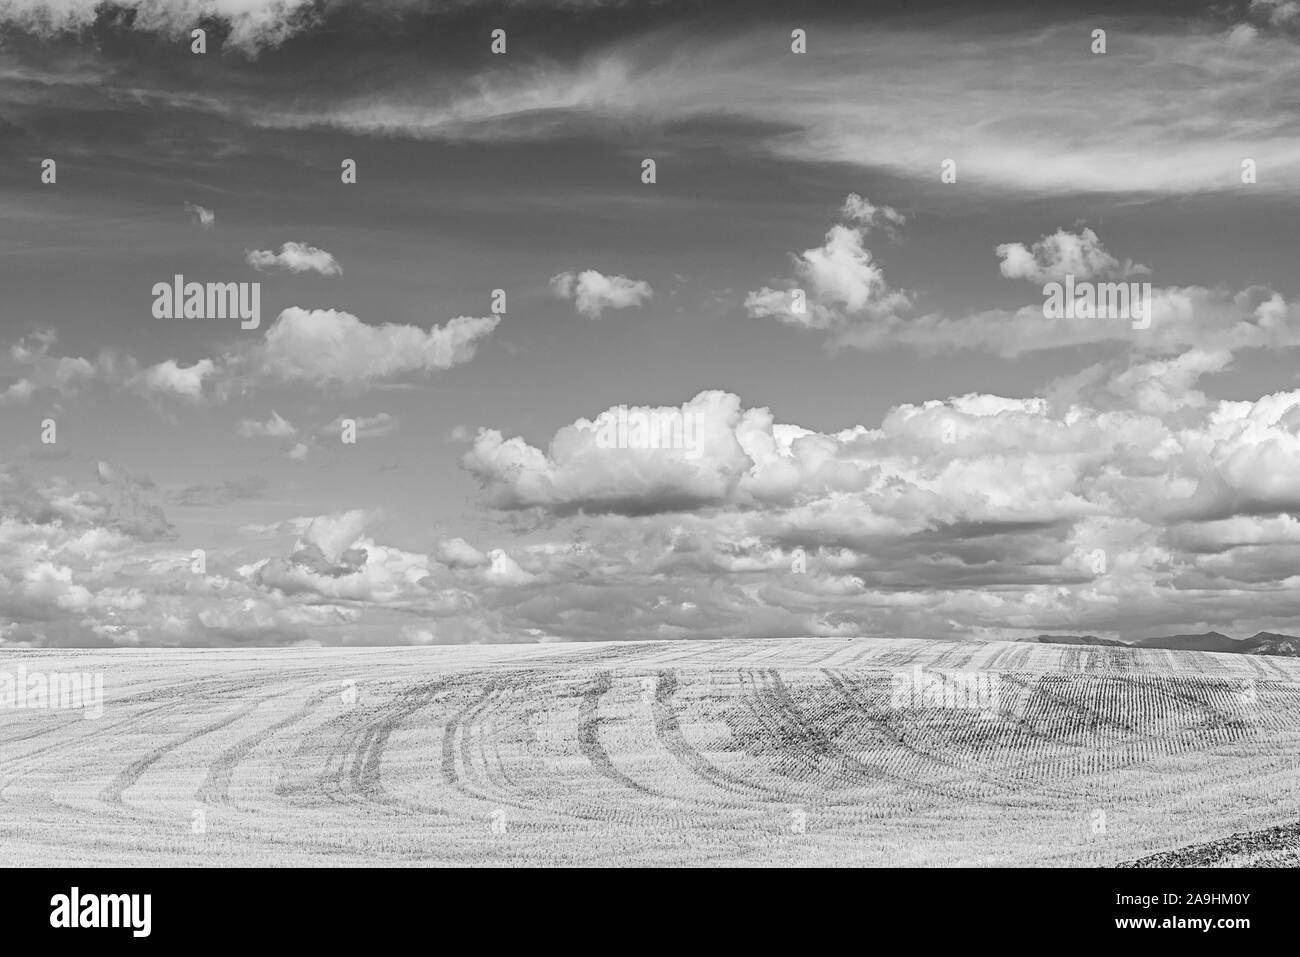 Looking out over harvested fields with fluffy white clouds in the sky. Stock Photo